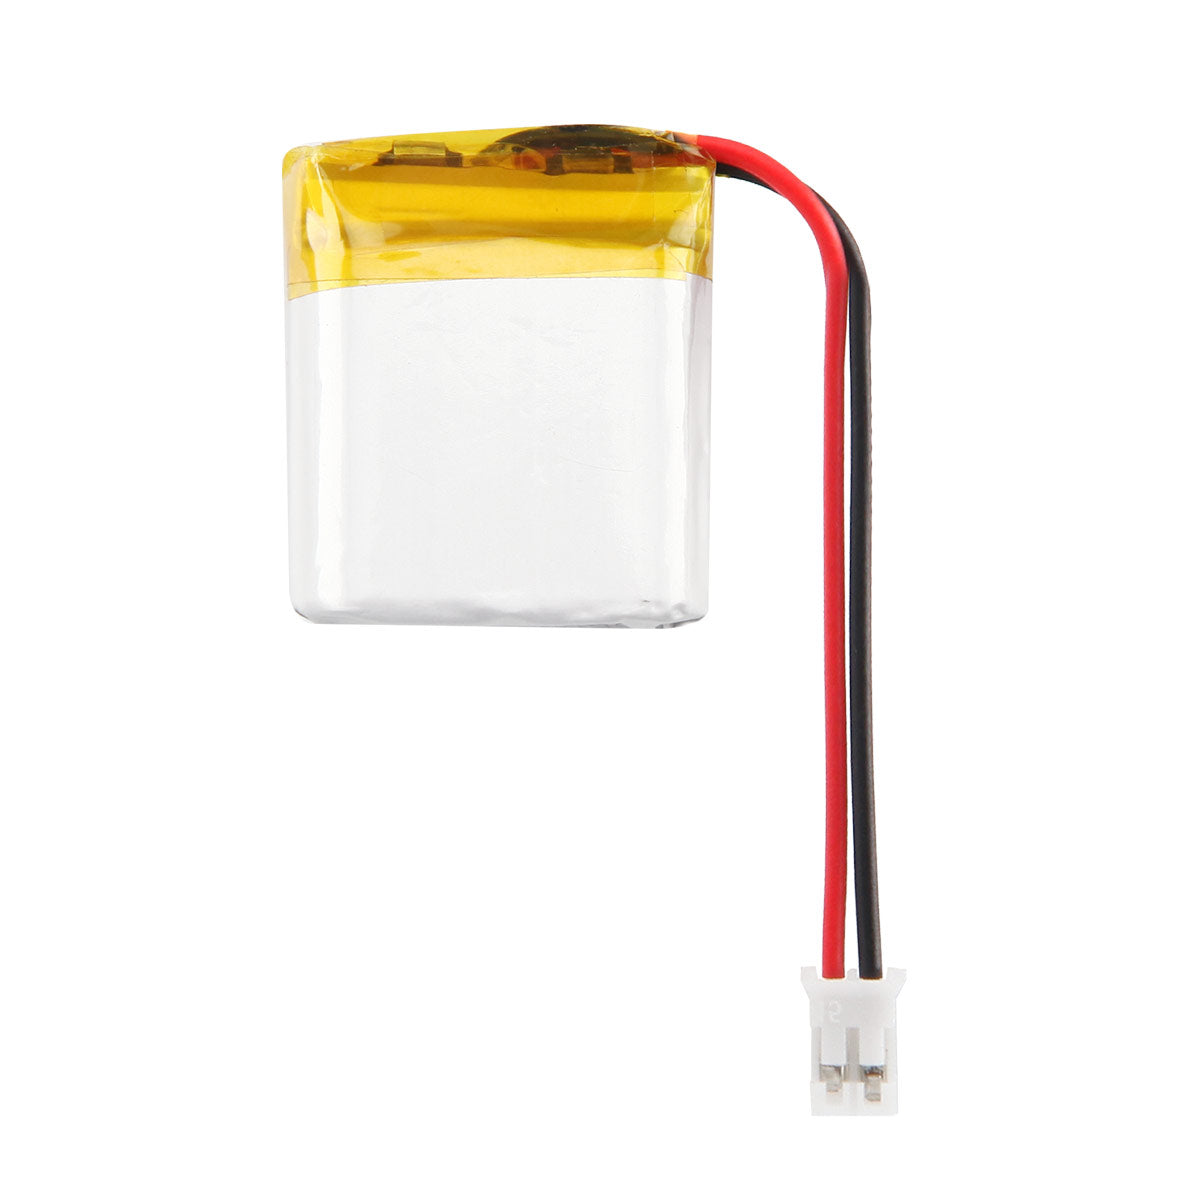 YDL 3.7V 450mAh 722528 Rechargeable Lithium Polymer Battery